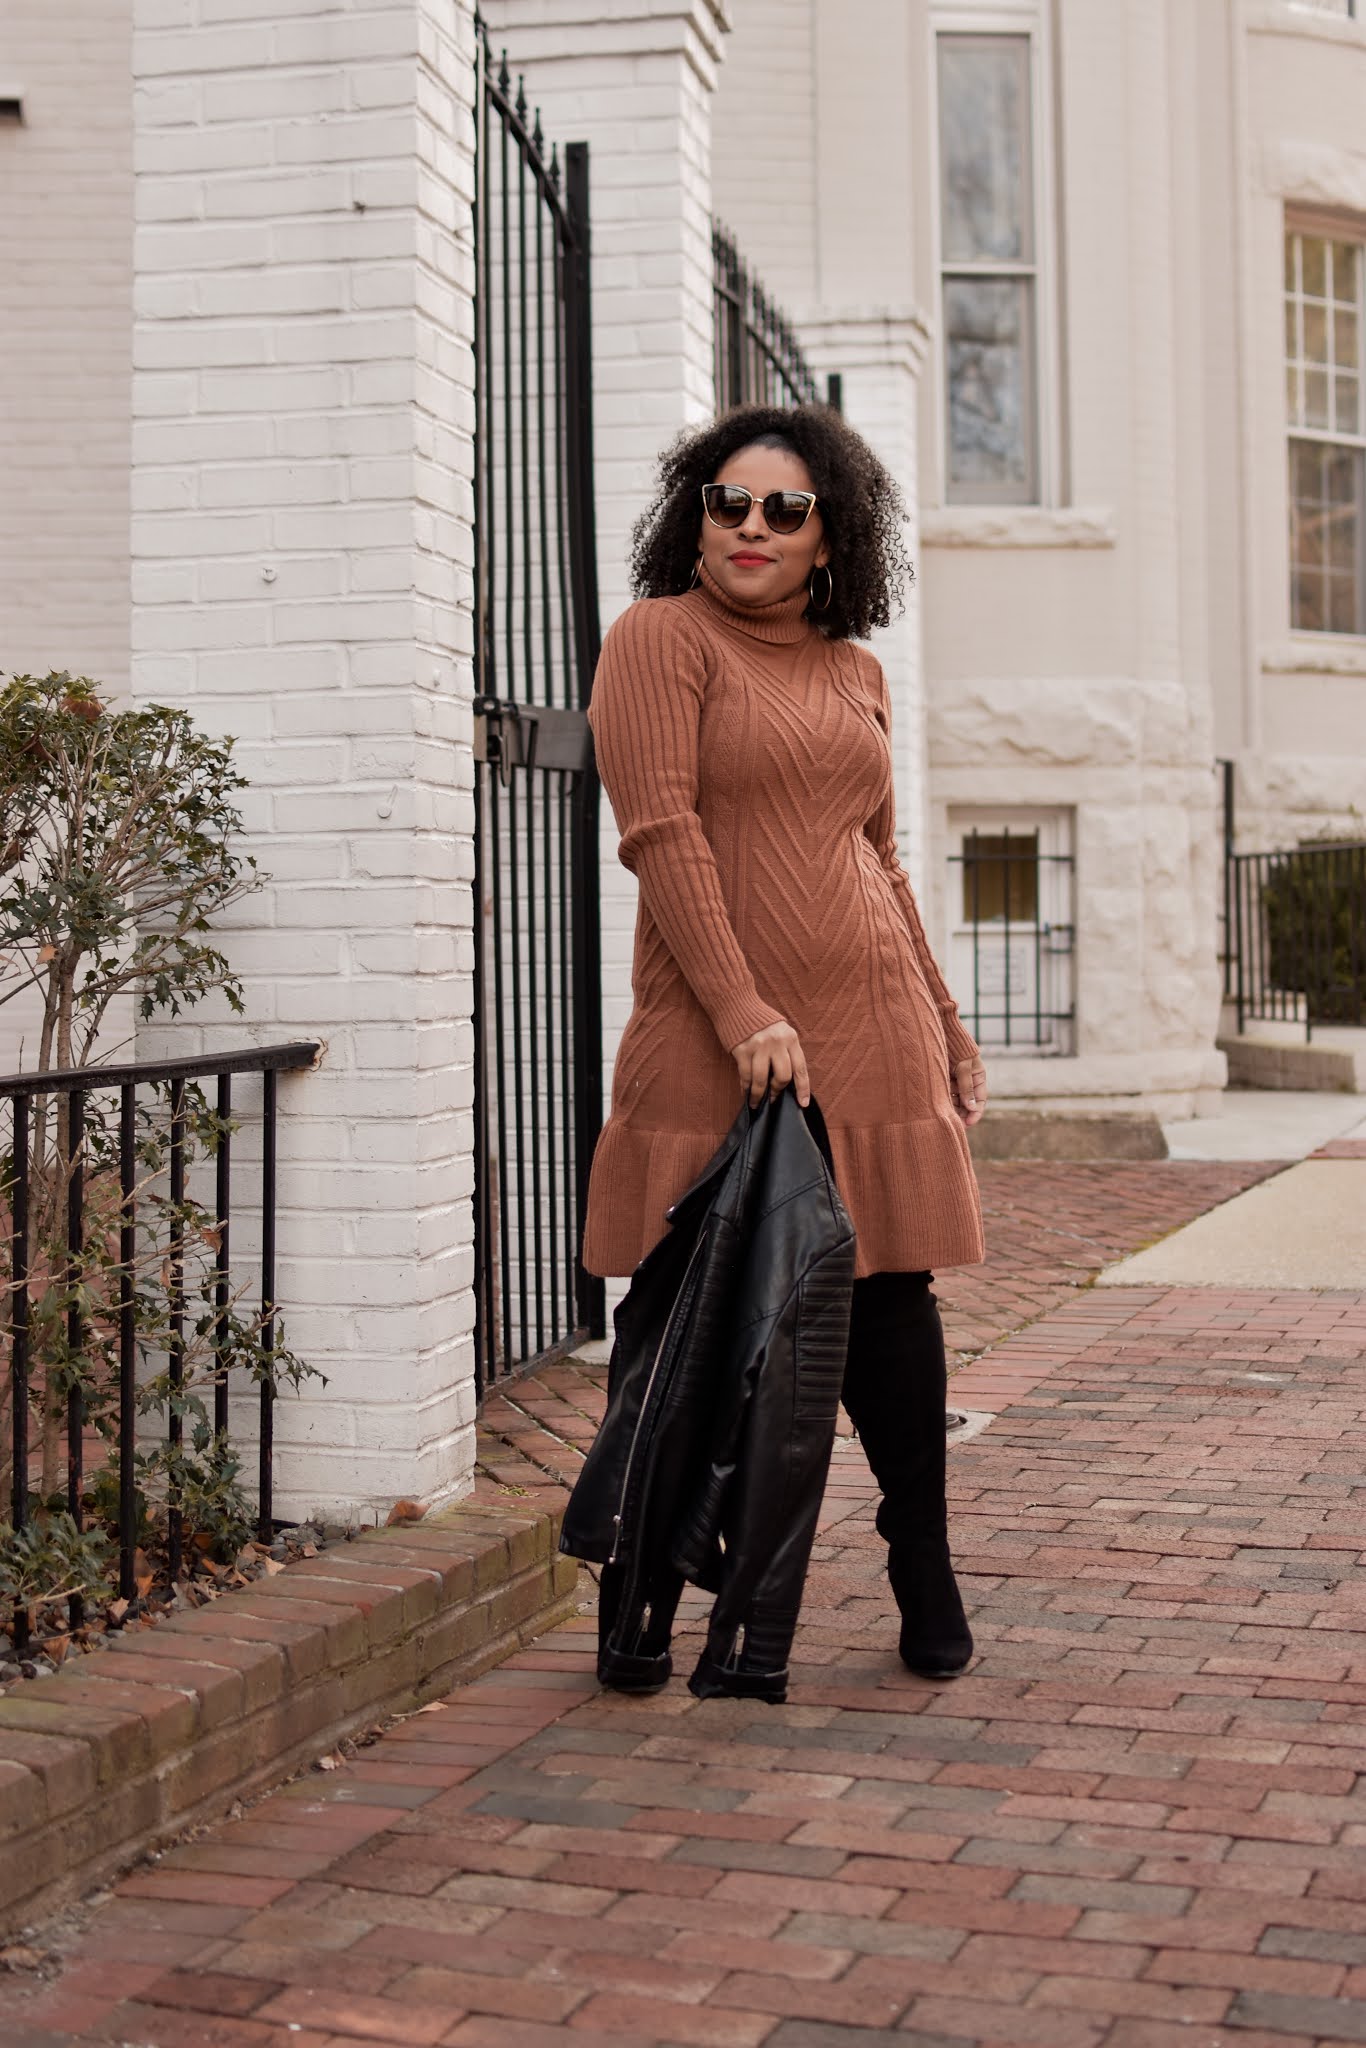 Sweater Dress + Over the Knee Boots Outfit